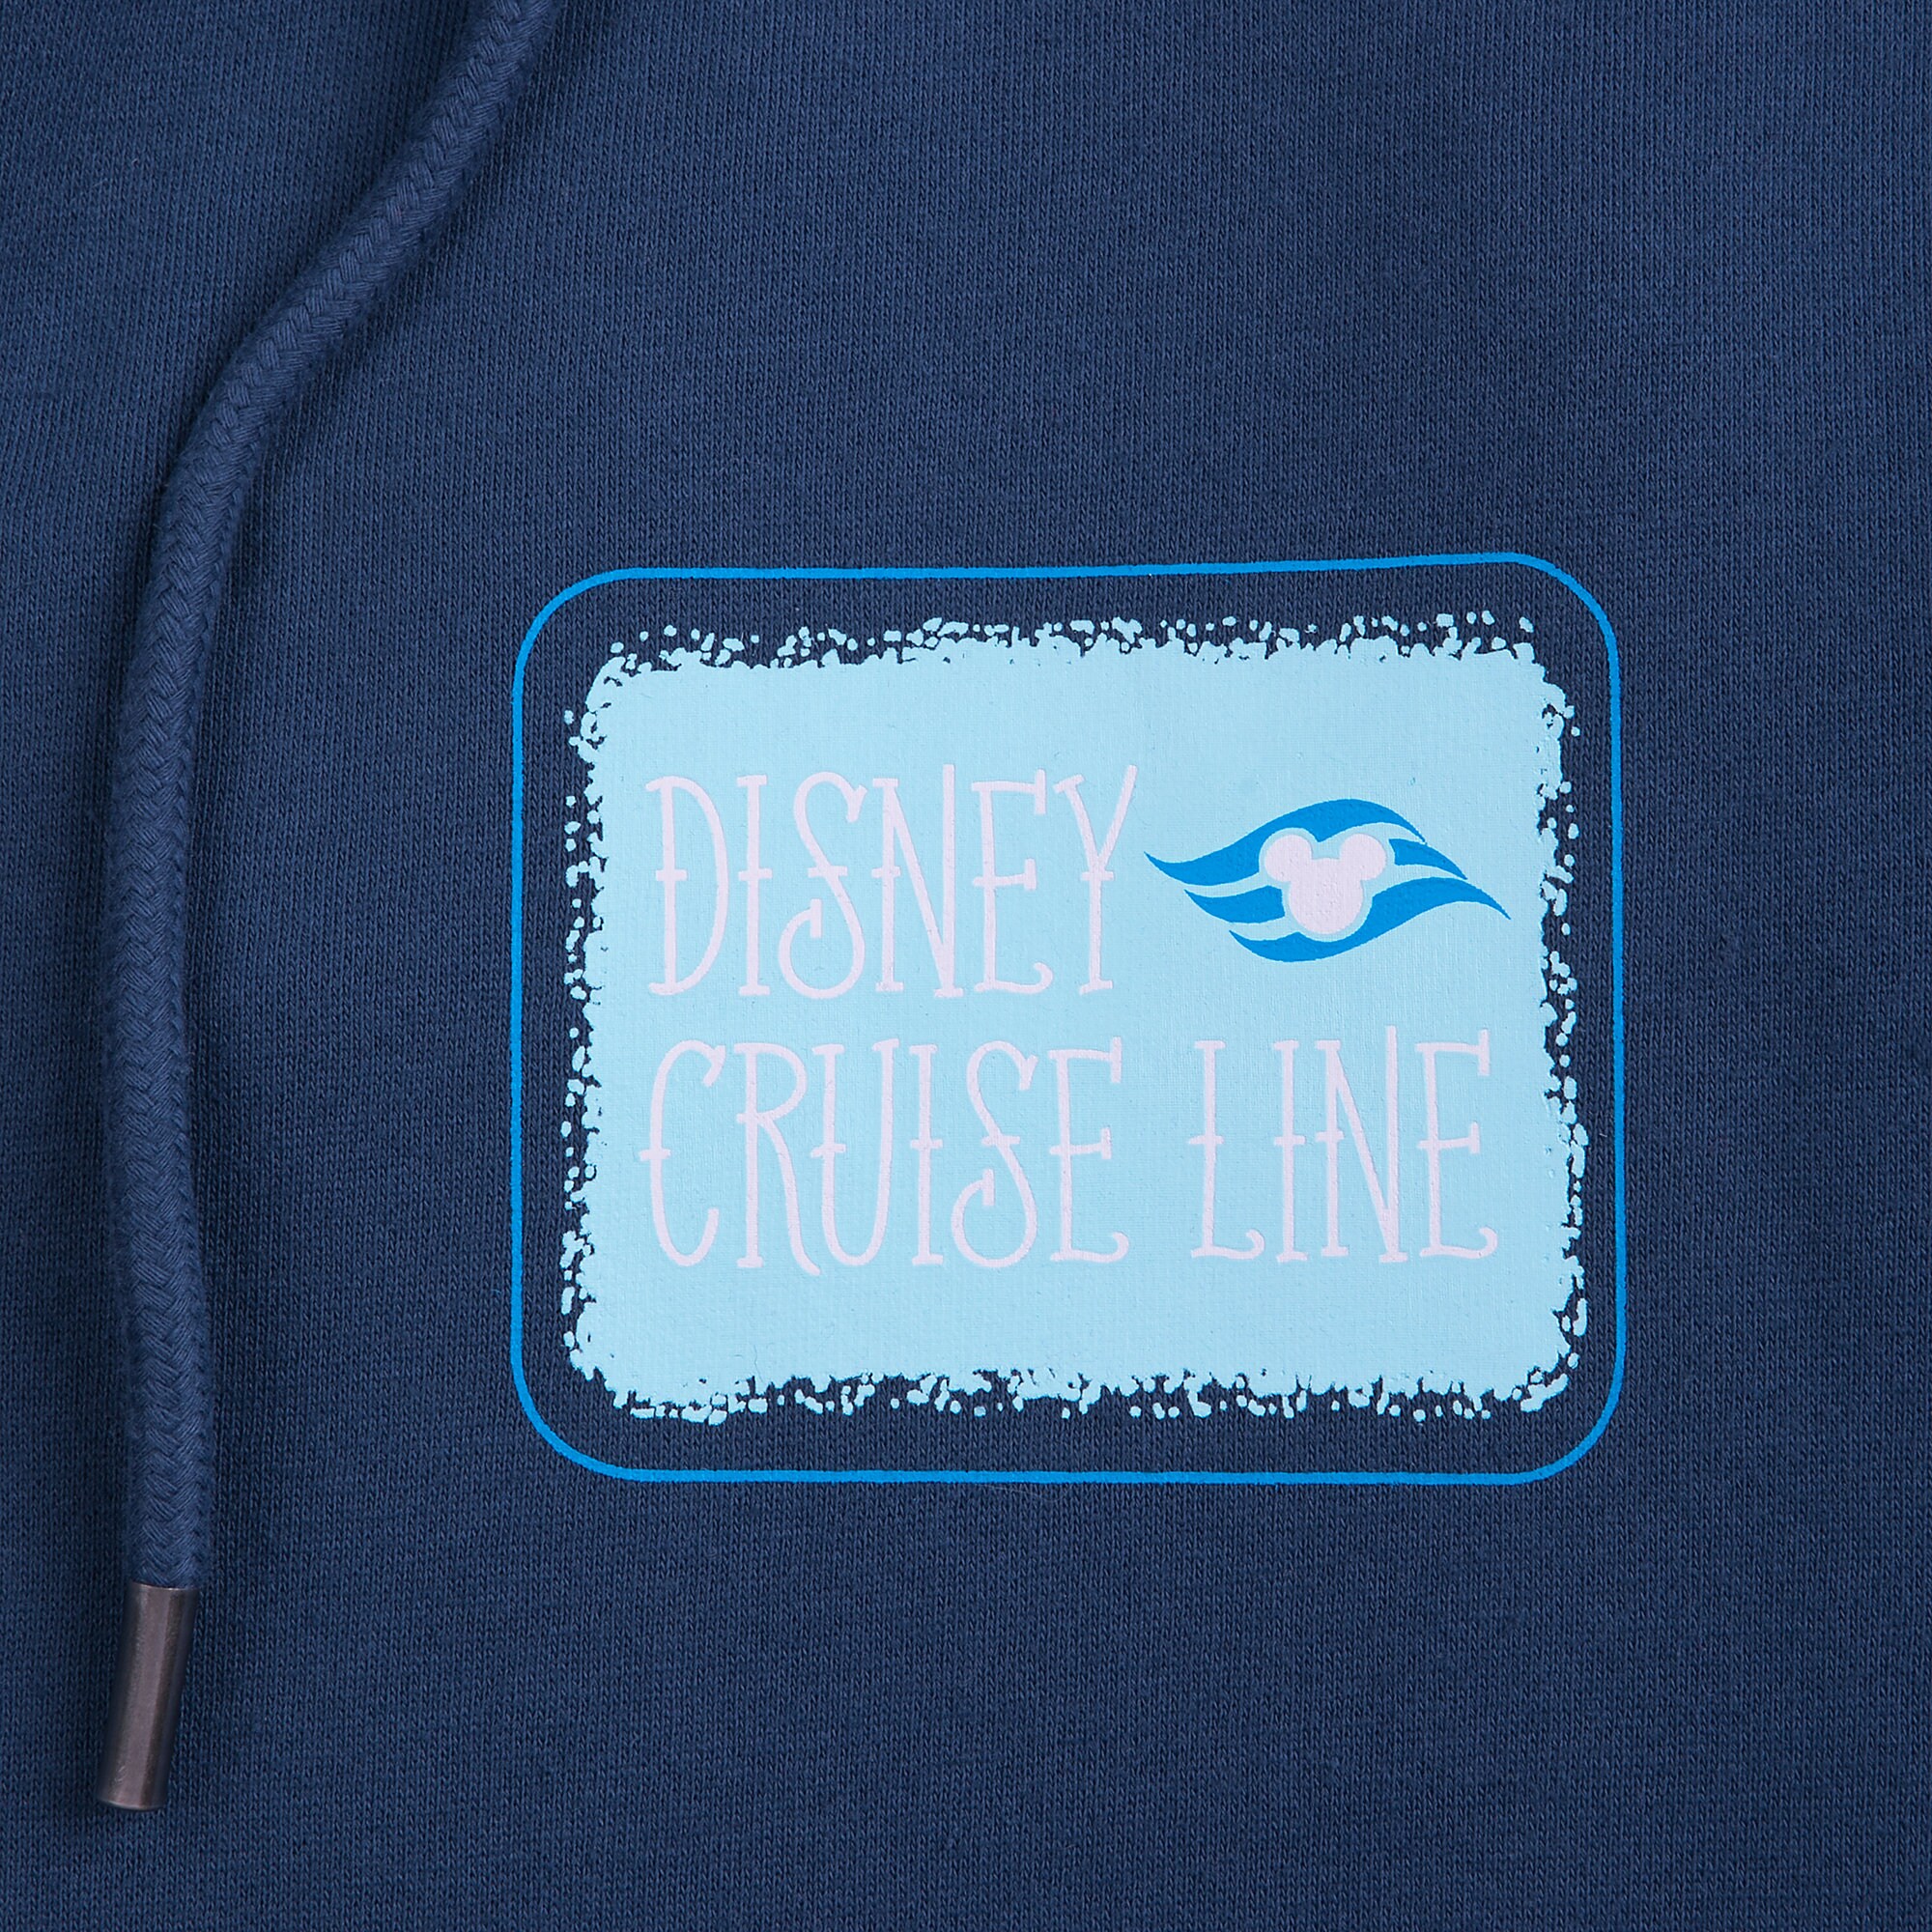 Captain Mickey Mouse and Crew Hoodie for Adults - Disney Cruise Line